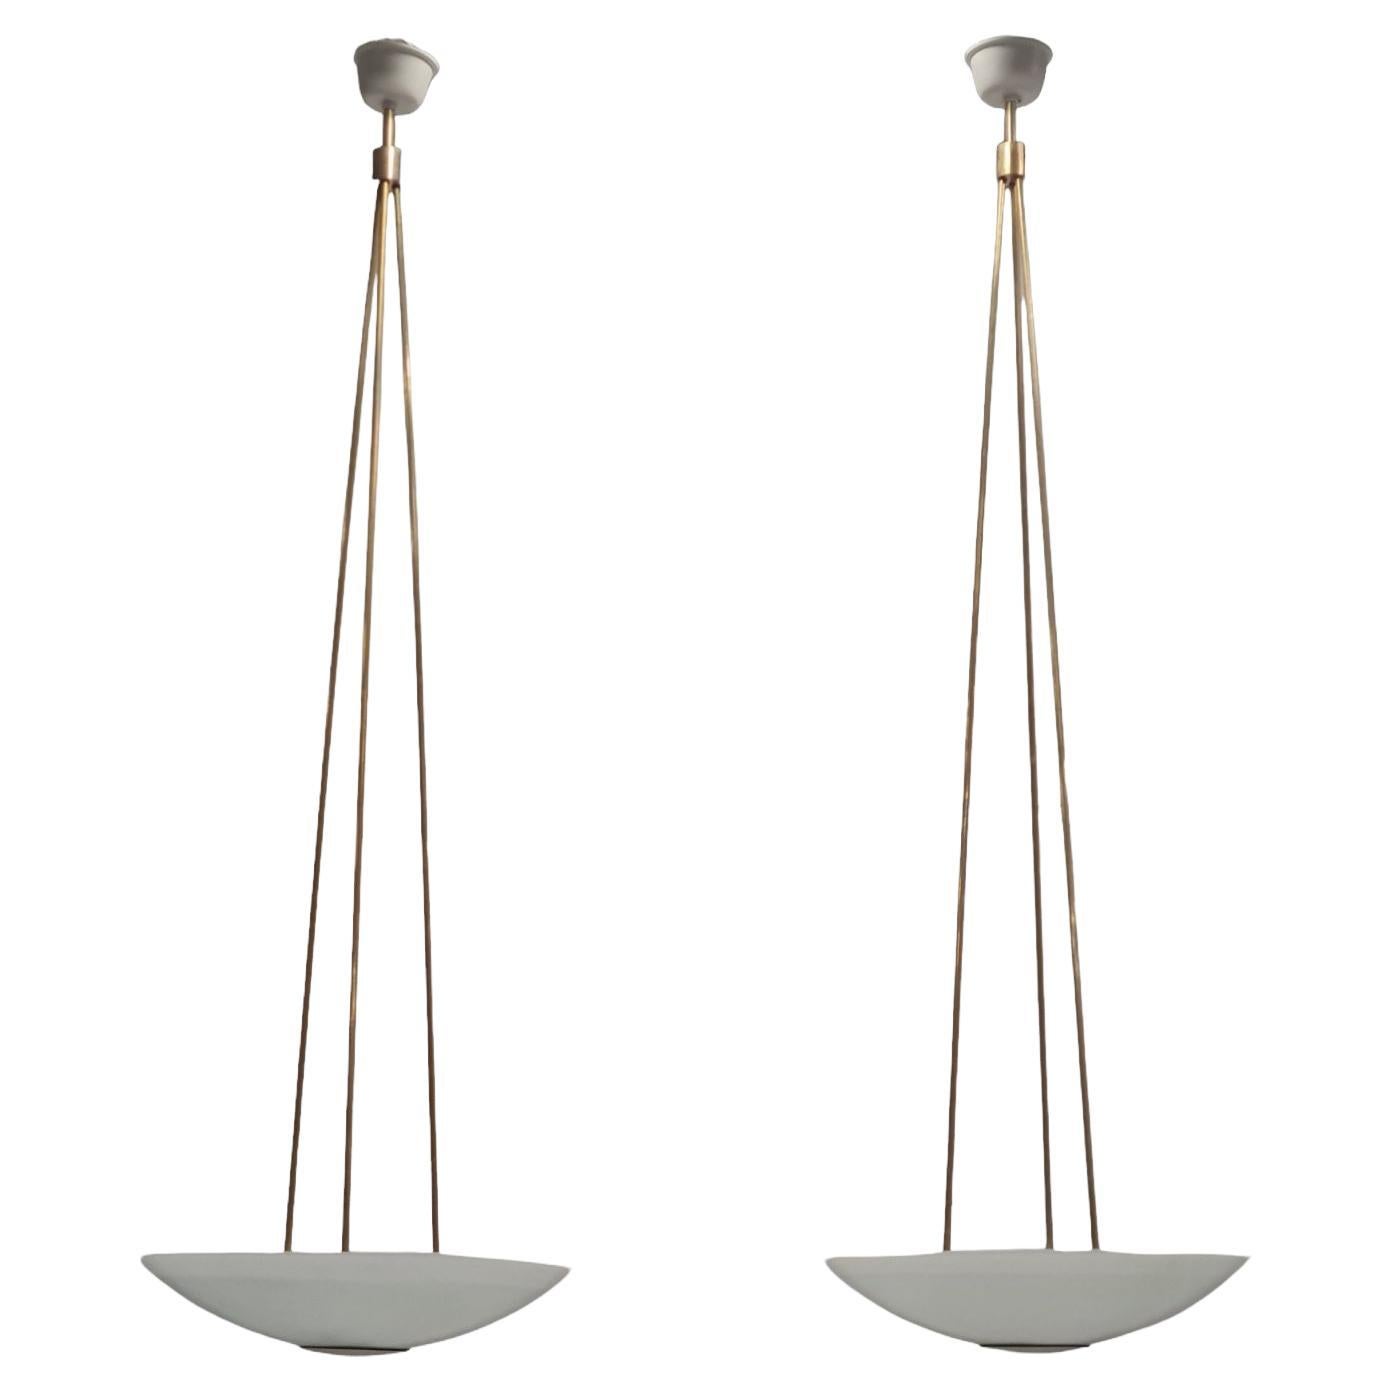 Impressive 2m high Paavo Tynell ceiling lamps, Taito 1940s.